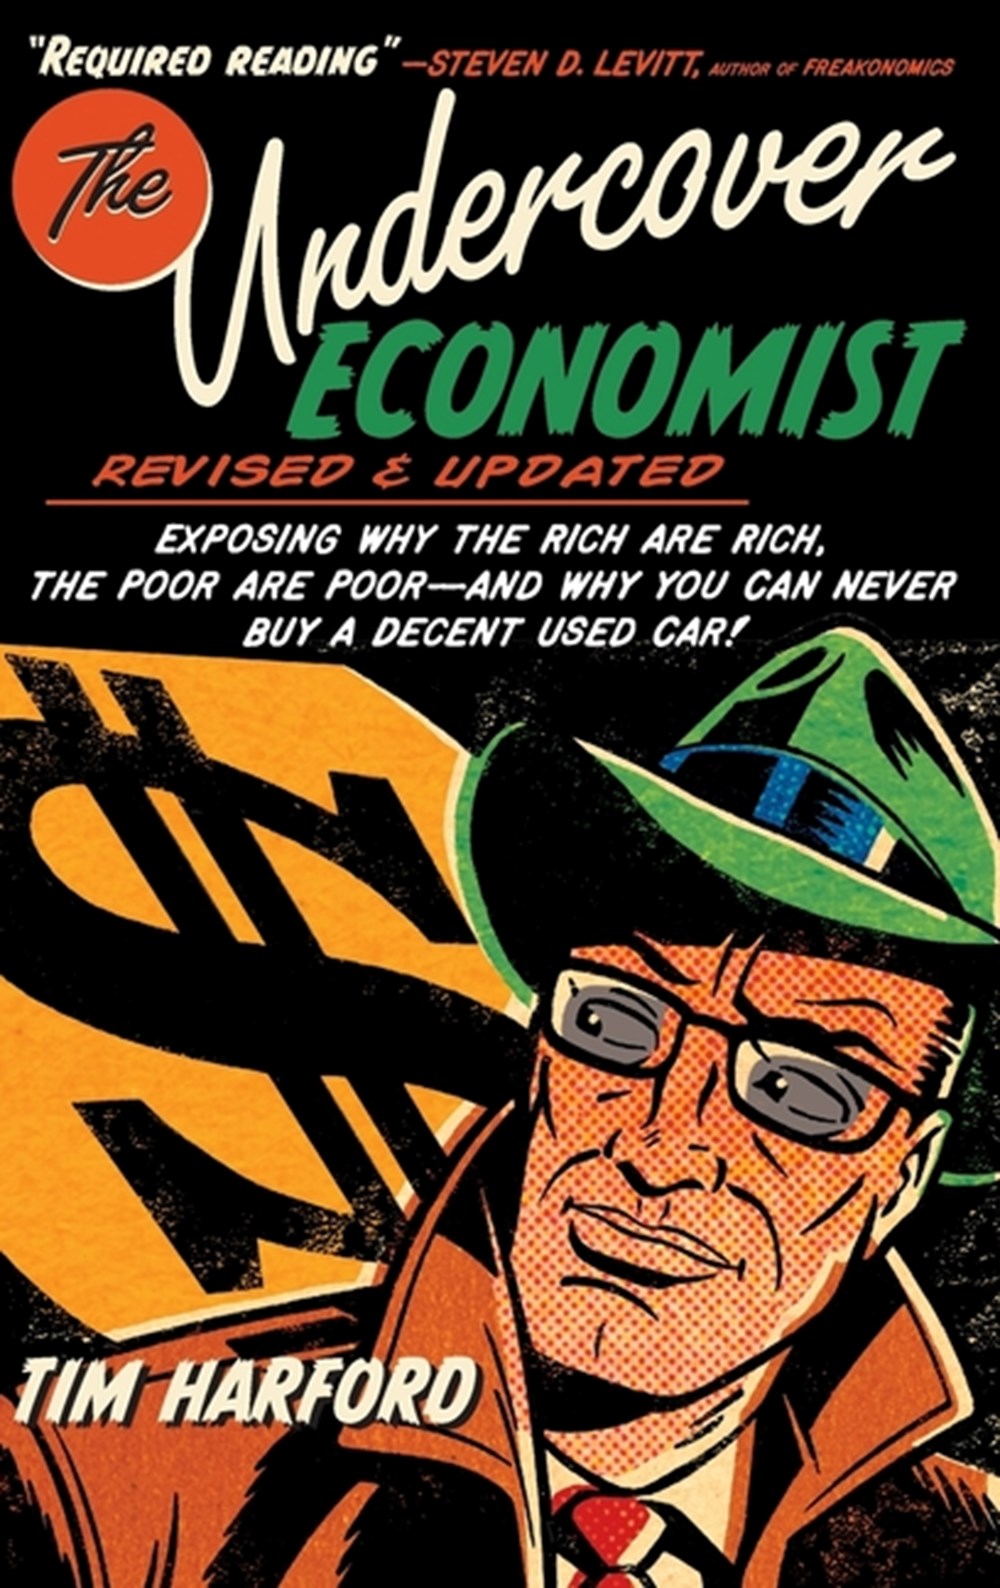 Undercover Economist, Revised and Updated Edition Exposing Why the Rich Are Rich, the Poor Are Poor 